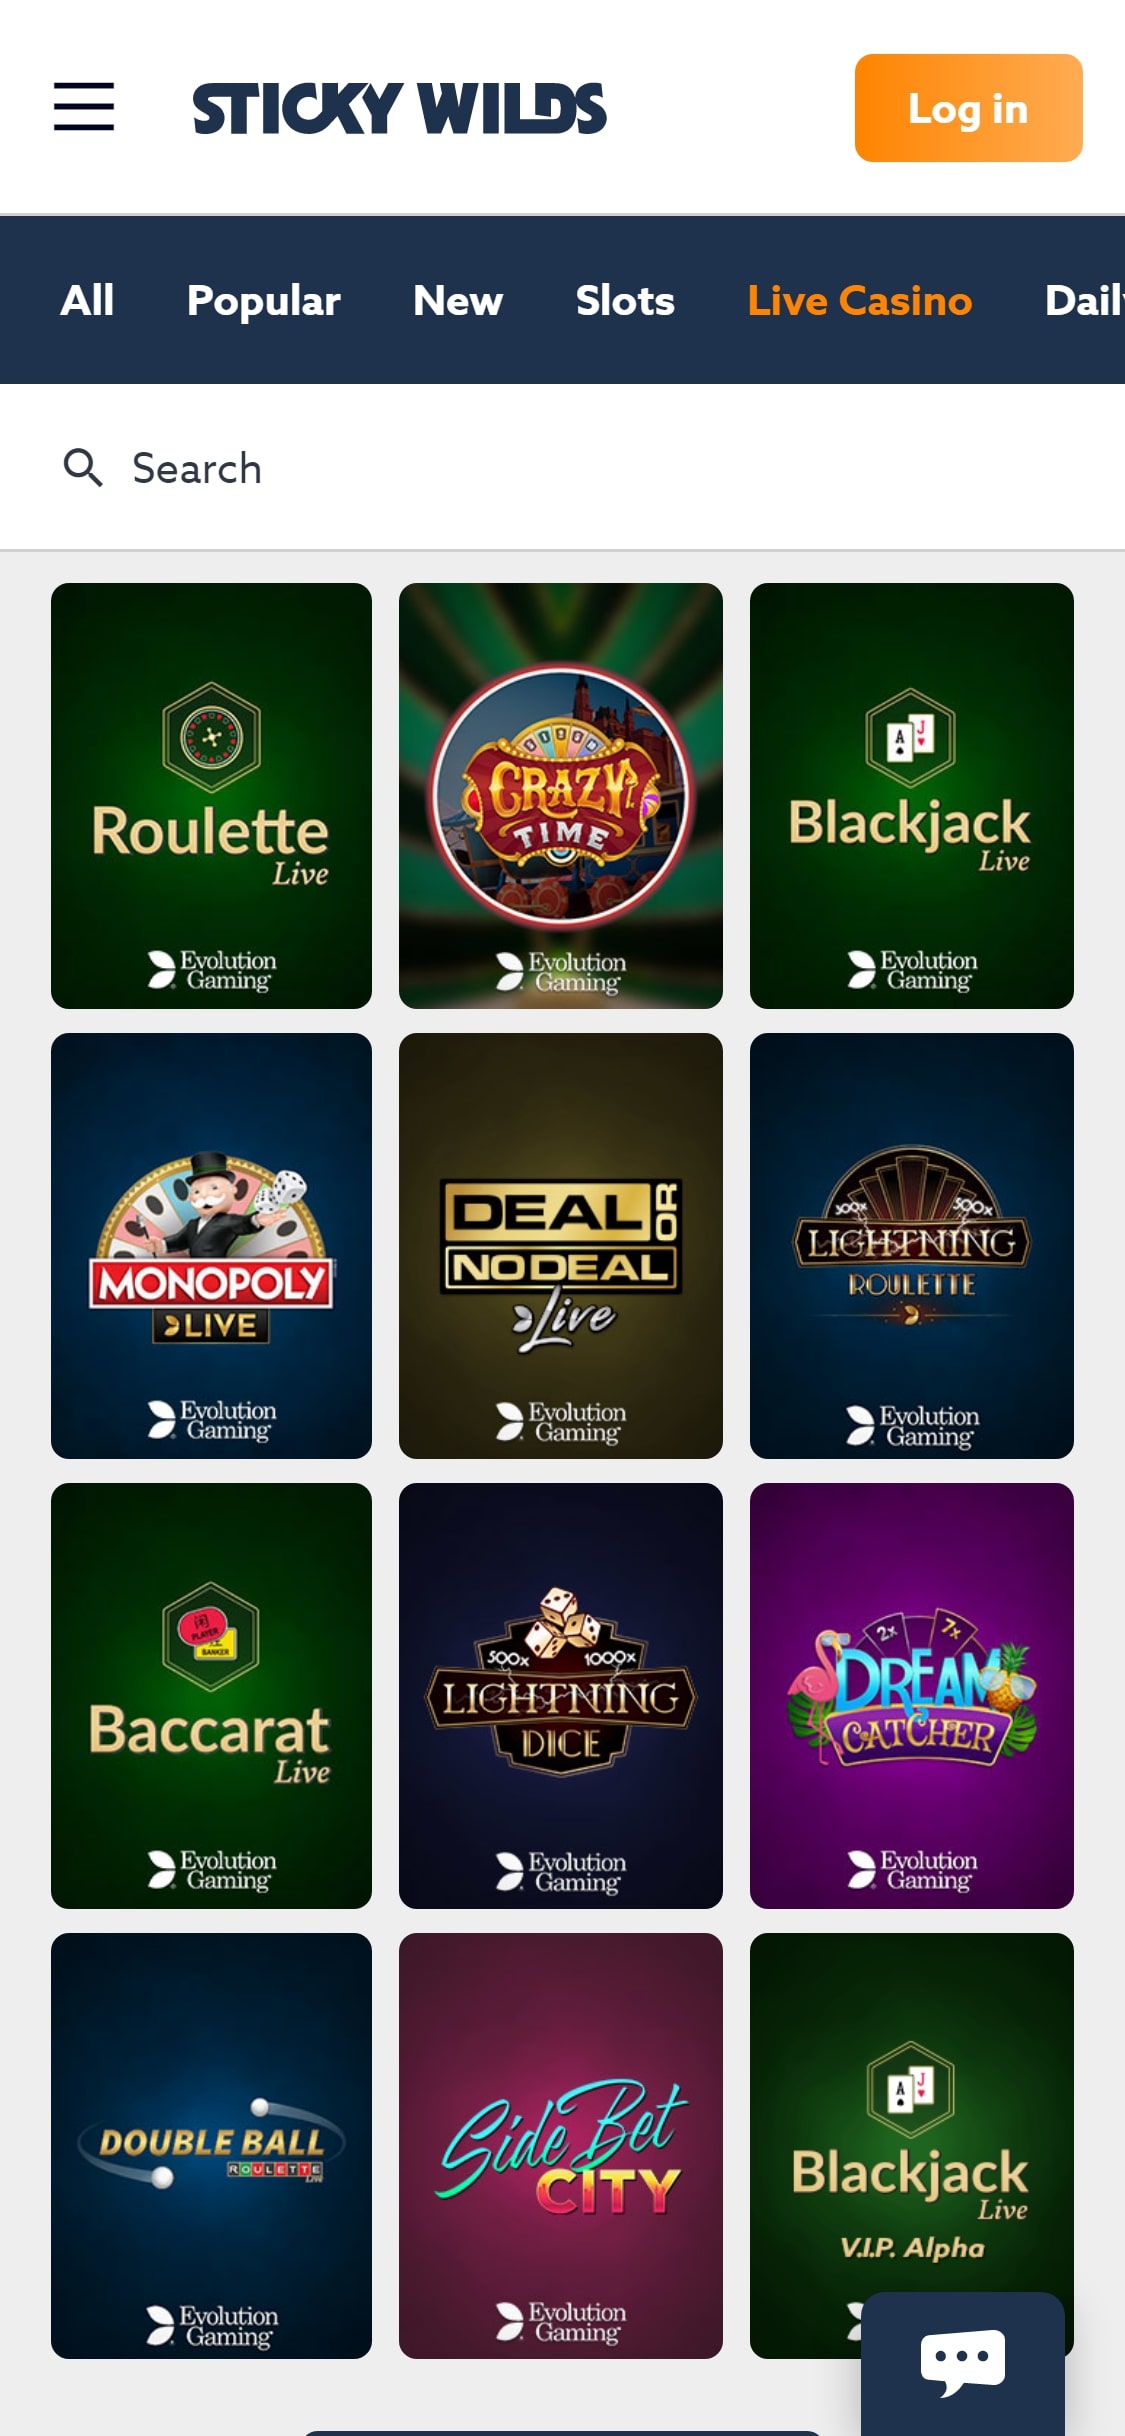 Sticky Wilds Casino Mobile Live Dealer Games Review